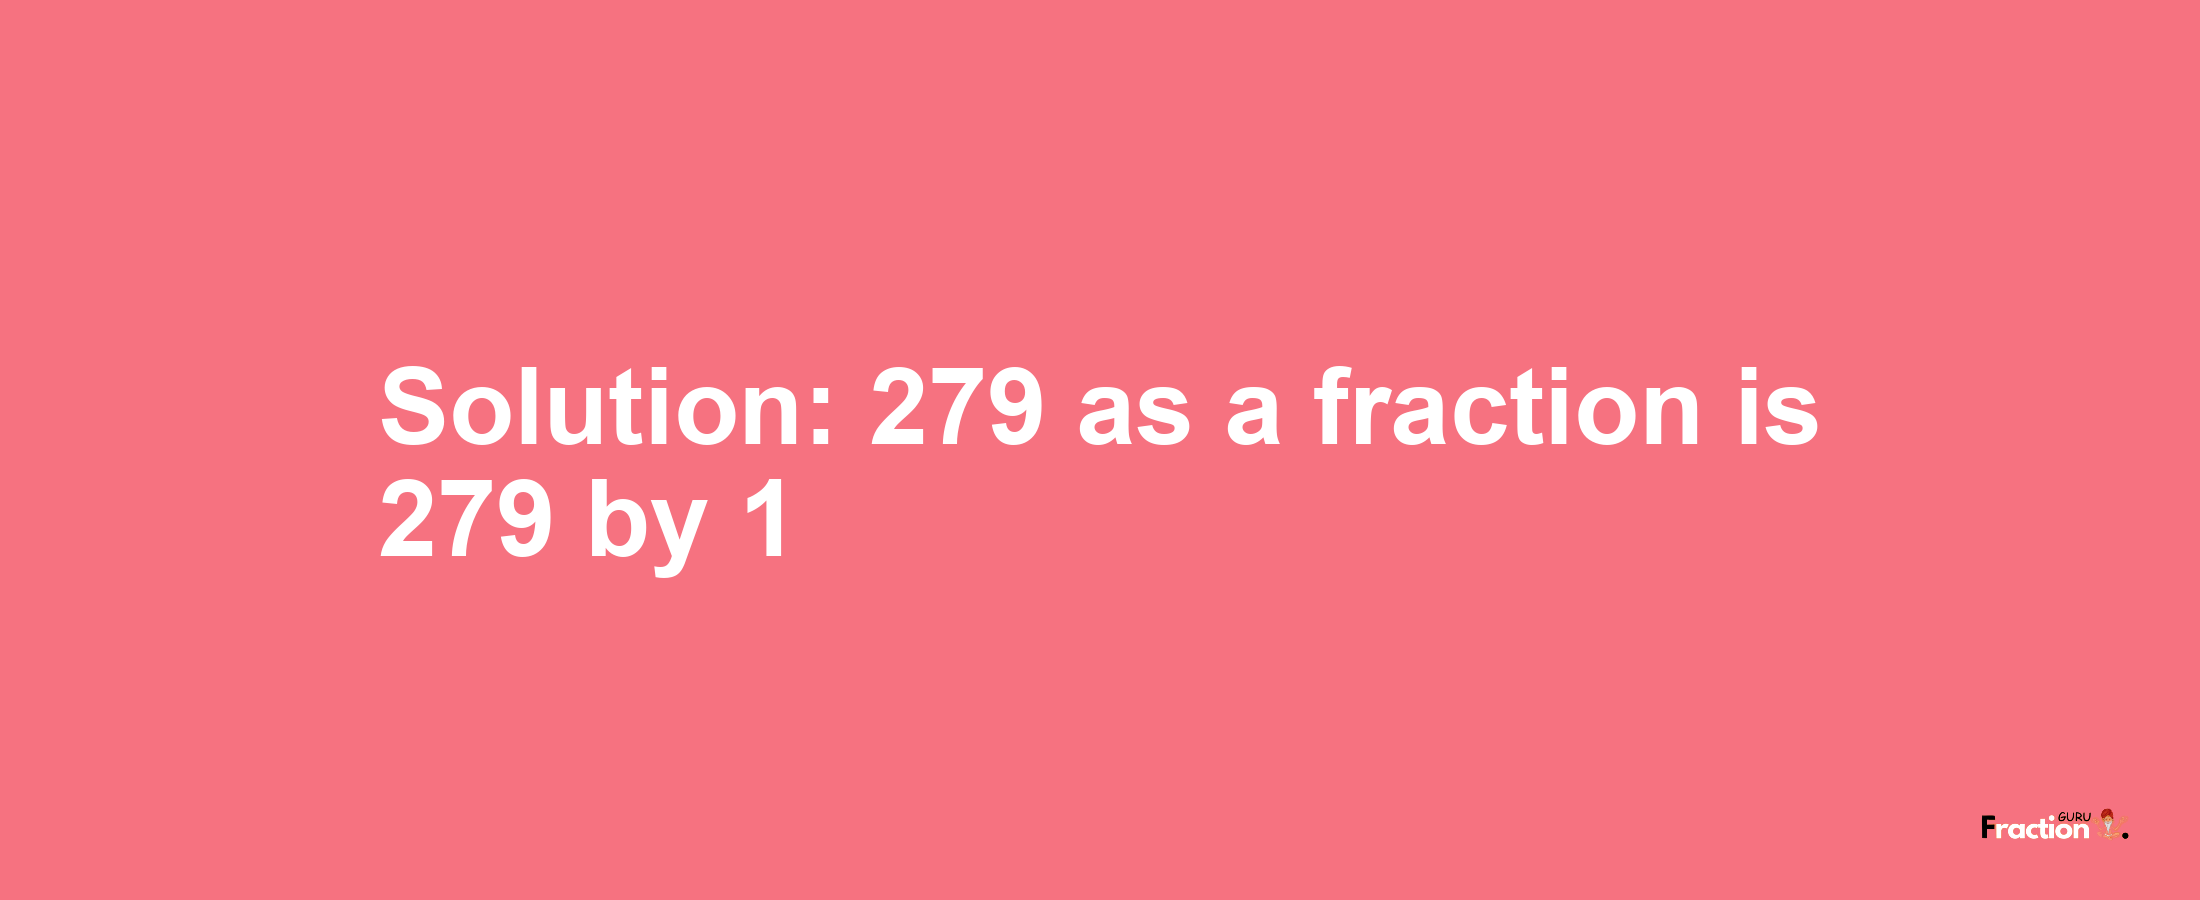 Solution:279 as a fraction is 279/1